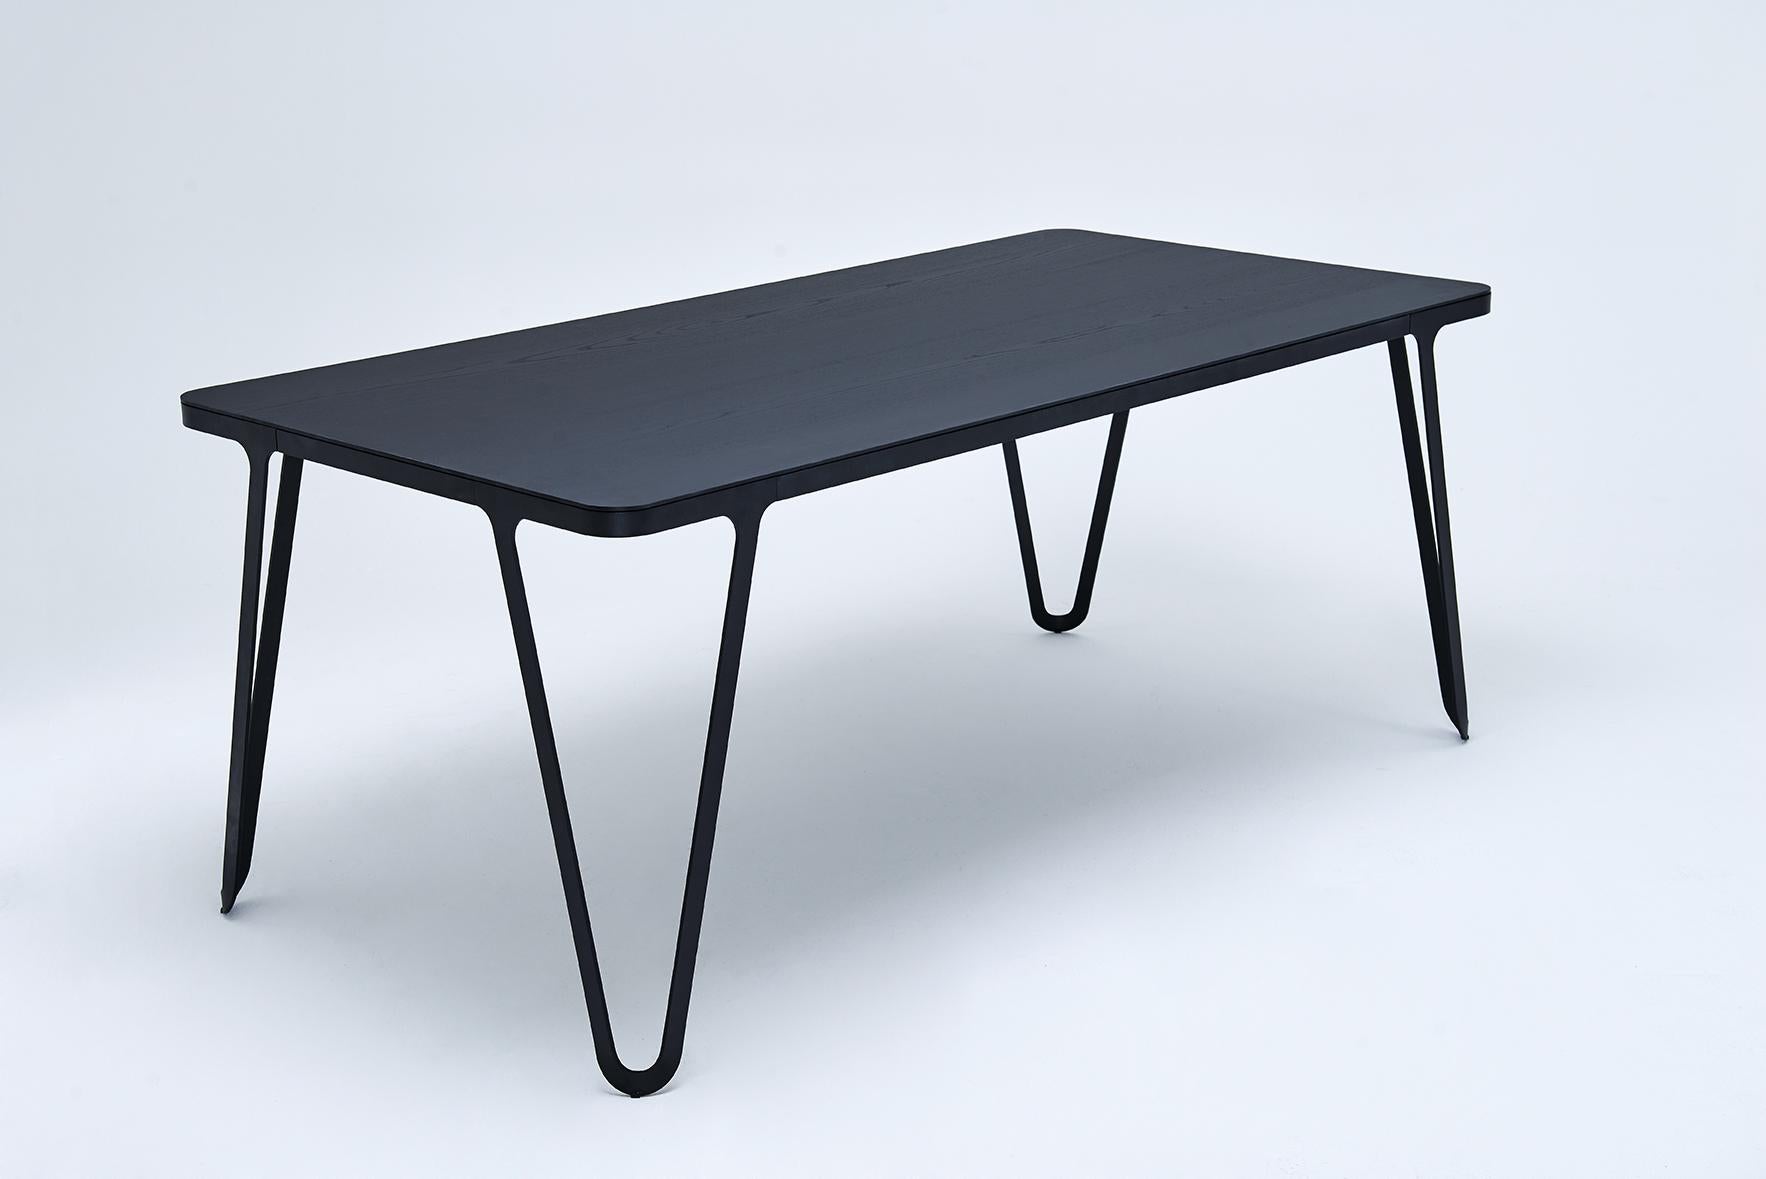 Loop table 90 ash by Sebastian Scherer
Dimensions: D 90 x W 90 x H 74 cm
Materials: oak, aluminium, wood
Weight: 23.9 kg
Also available: colors:solid wood (matt lacquered or oiled): black and white stained ash / natural oak / american